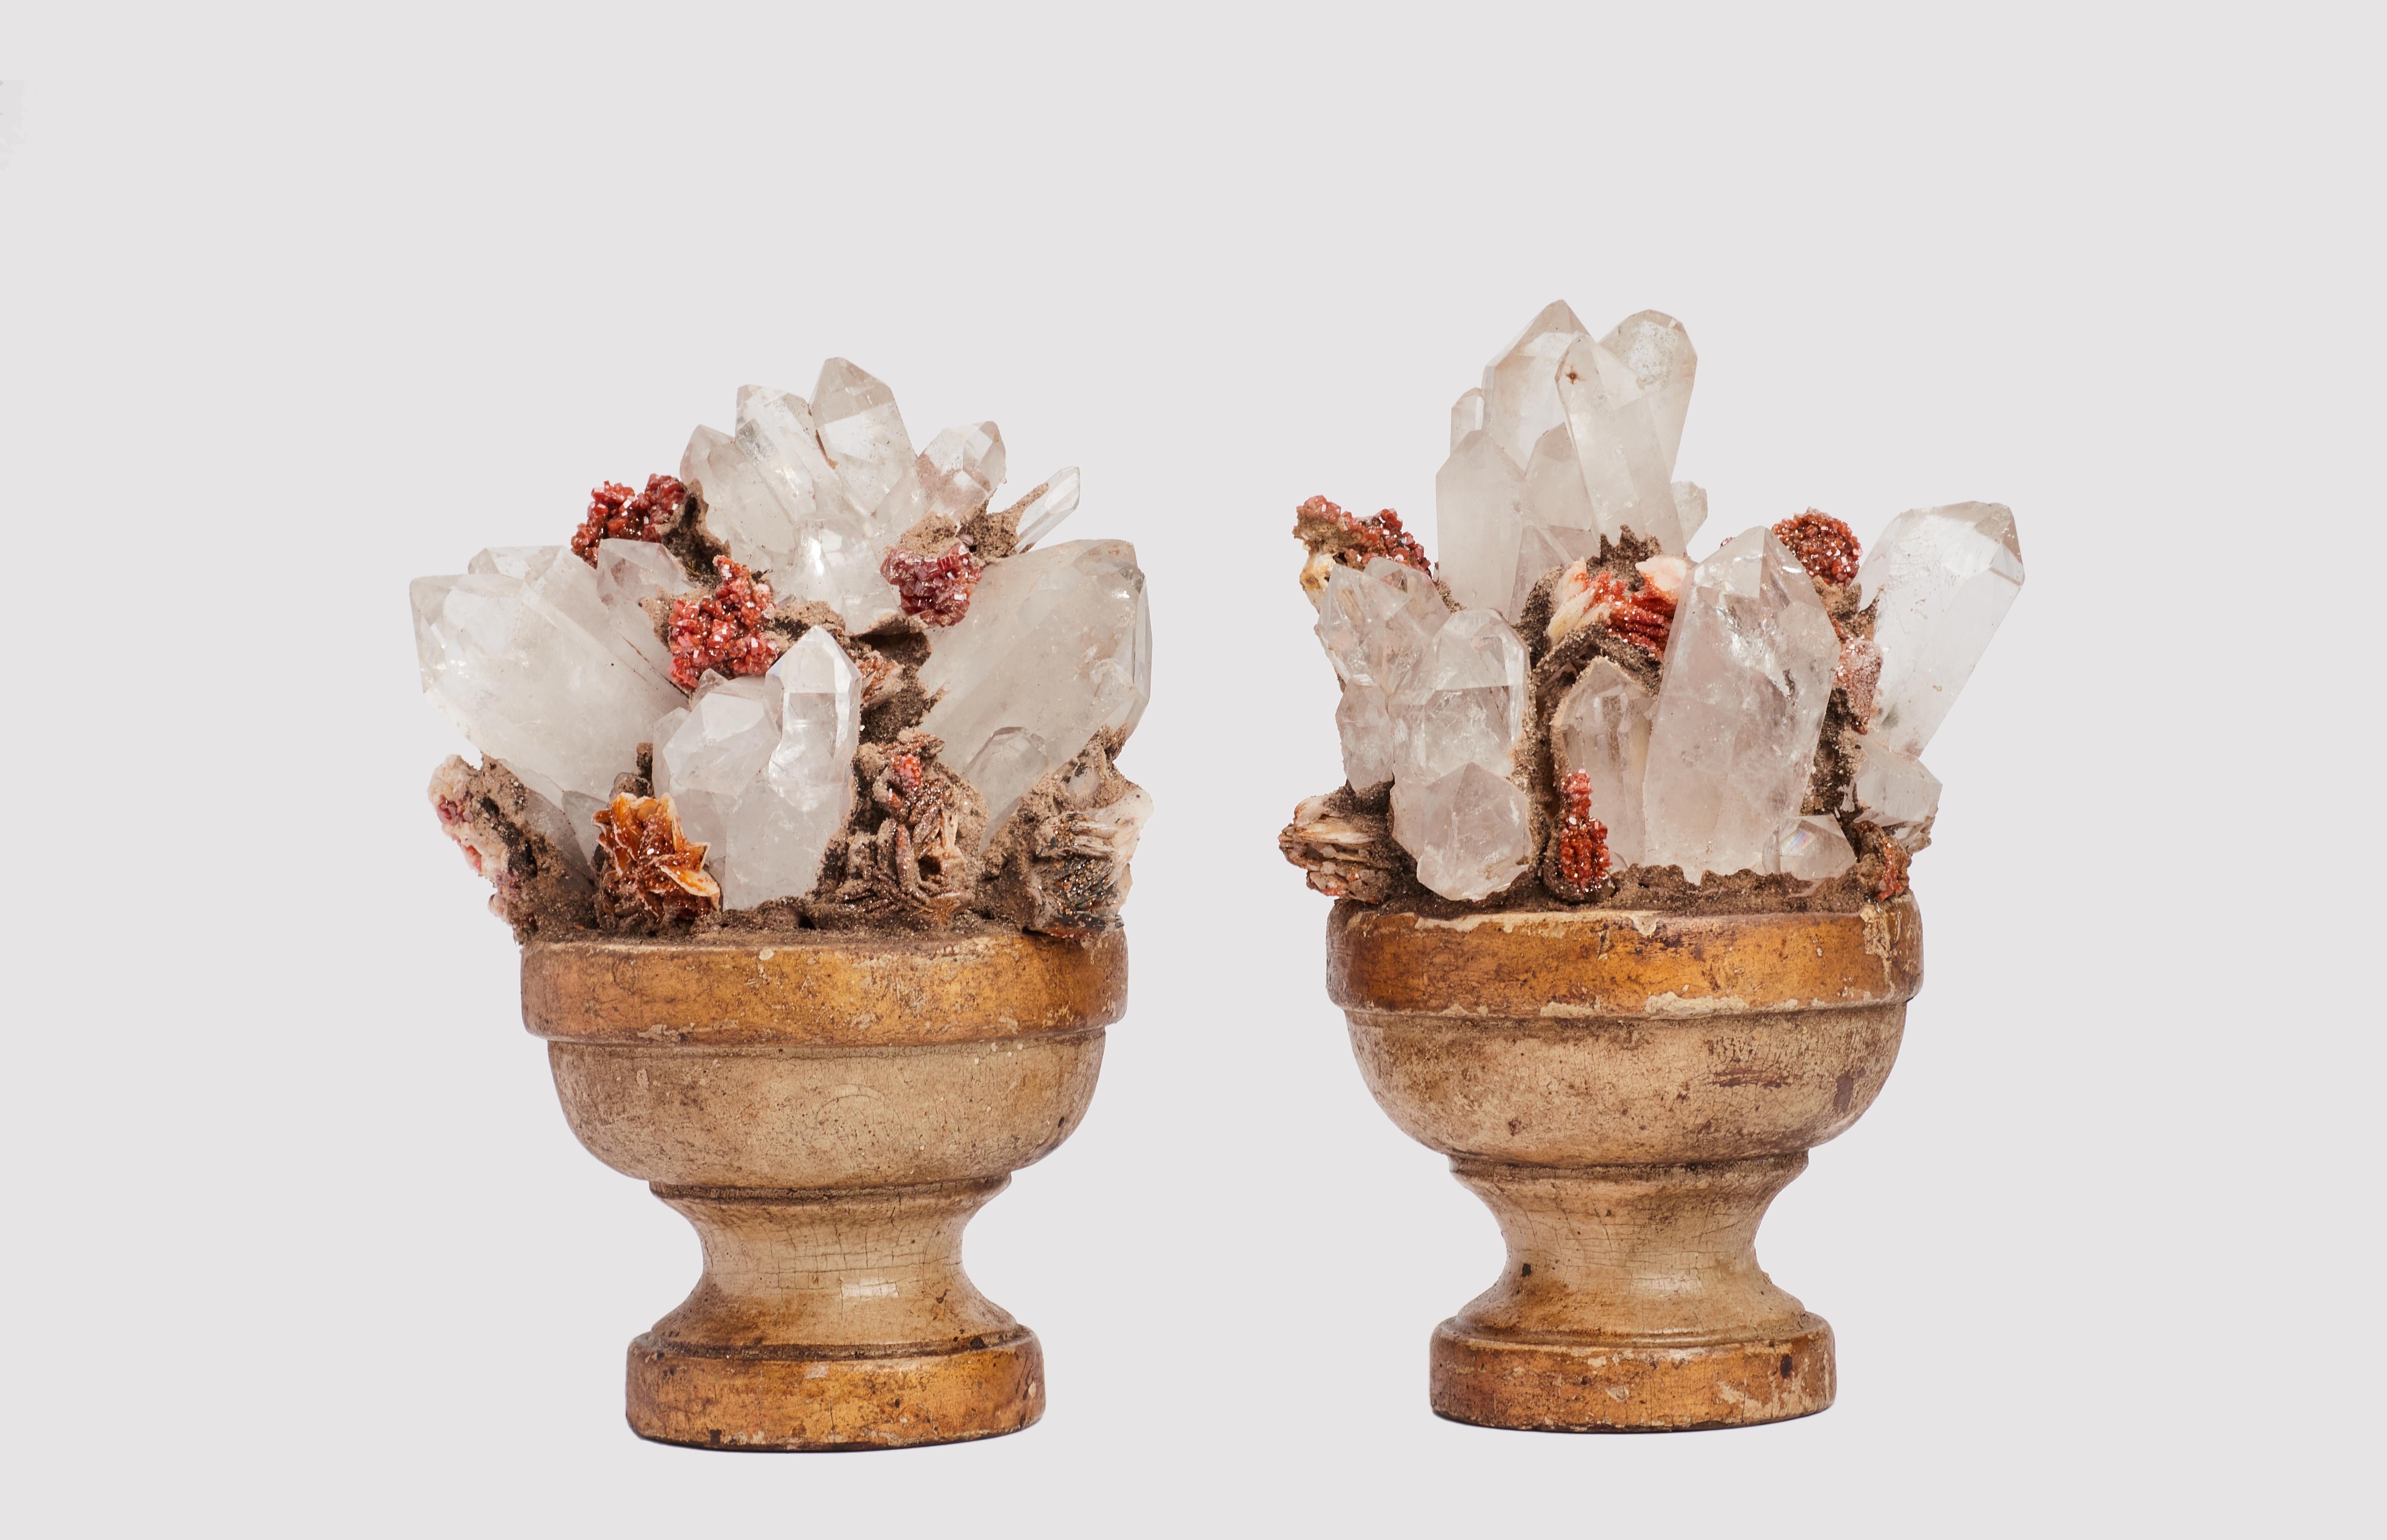 A Naturalia mineral specimen. A pair of Vanadinite and quartz crystals mounted over carved gold gilded and lacquered wooden base, white-beje color. Italy end of 19th century.